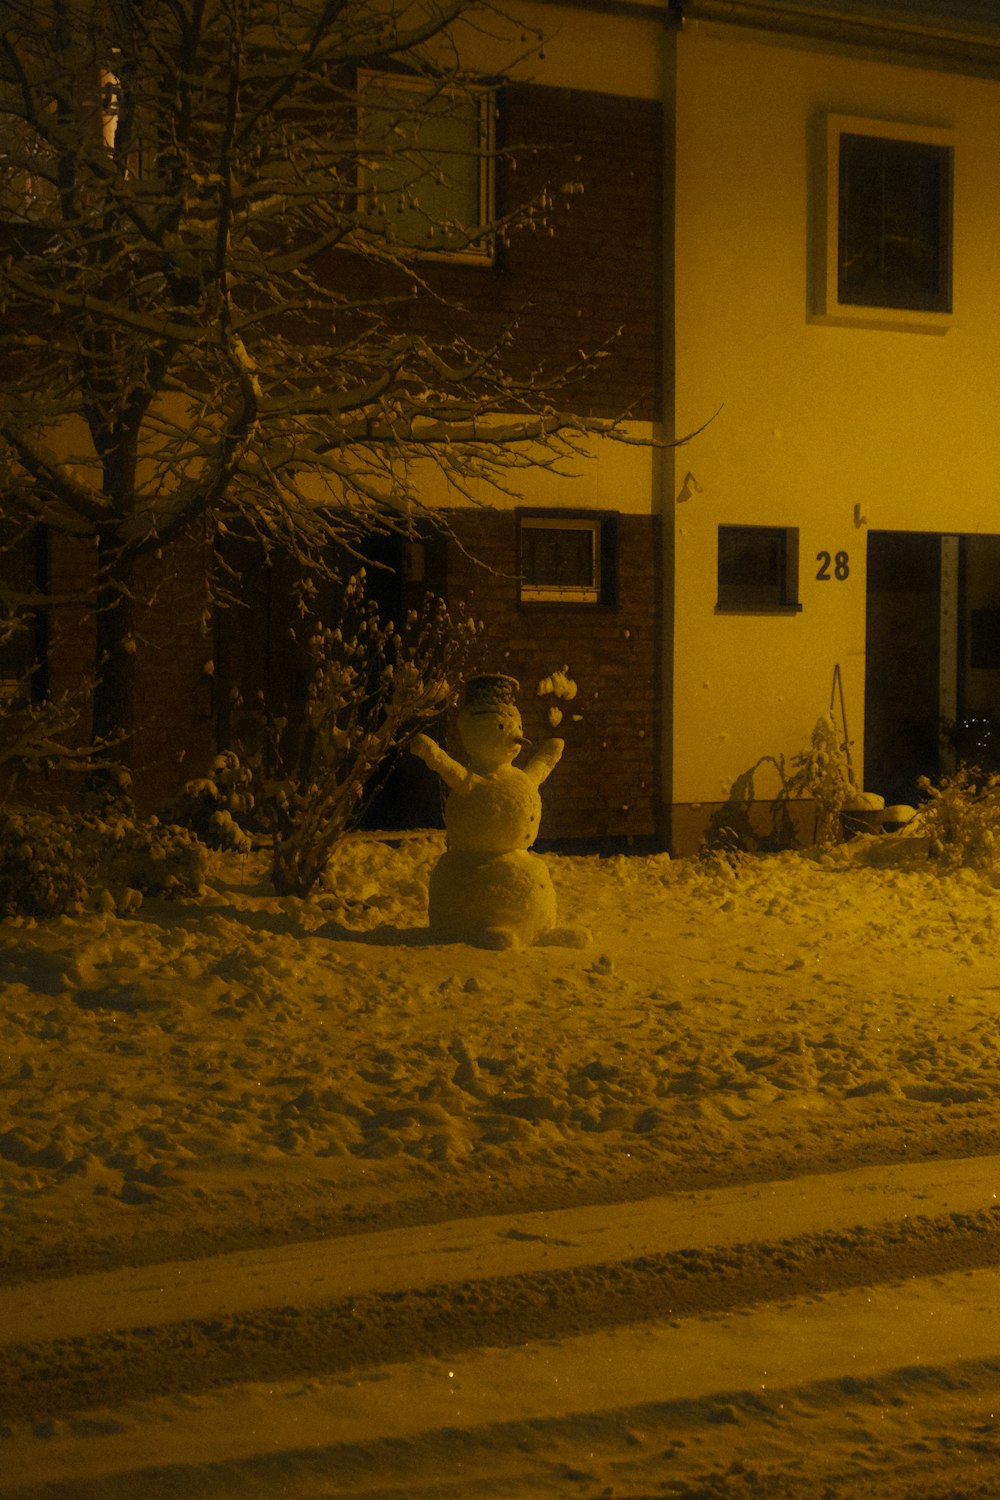 a snowman in front of a house on a snowy night